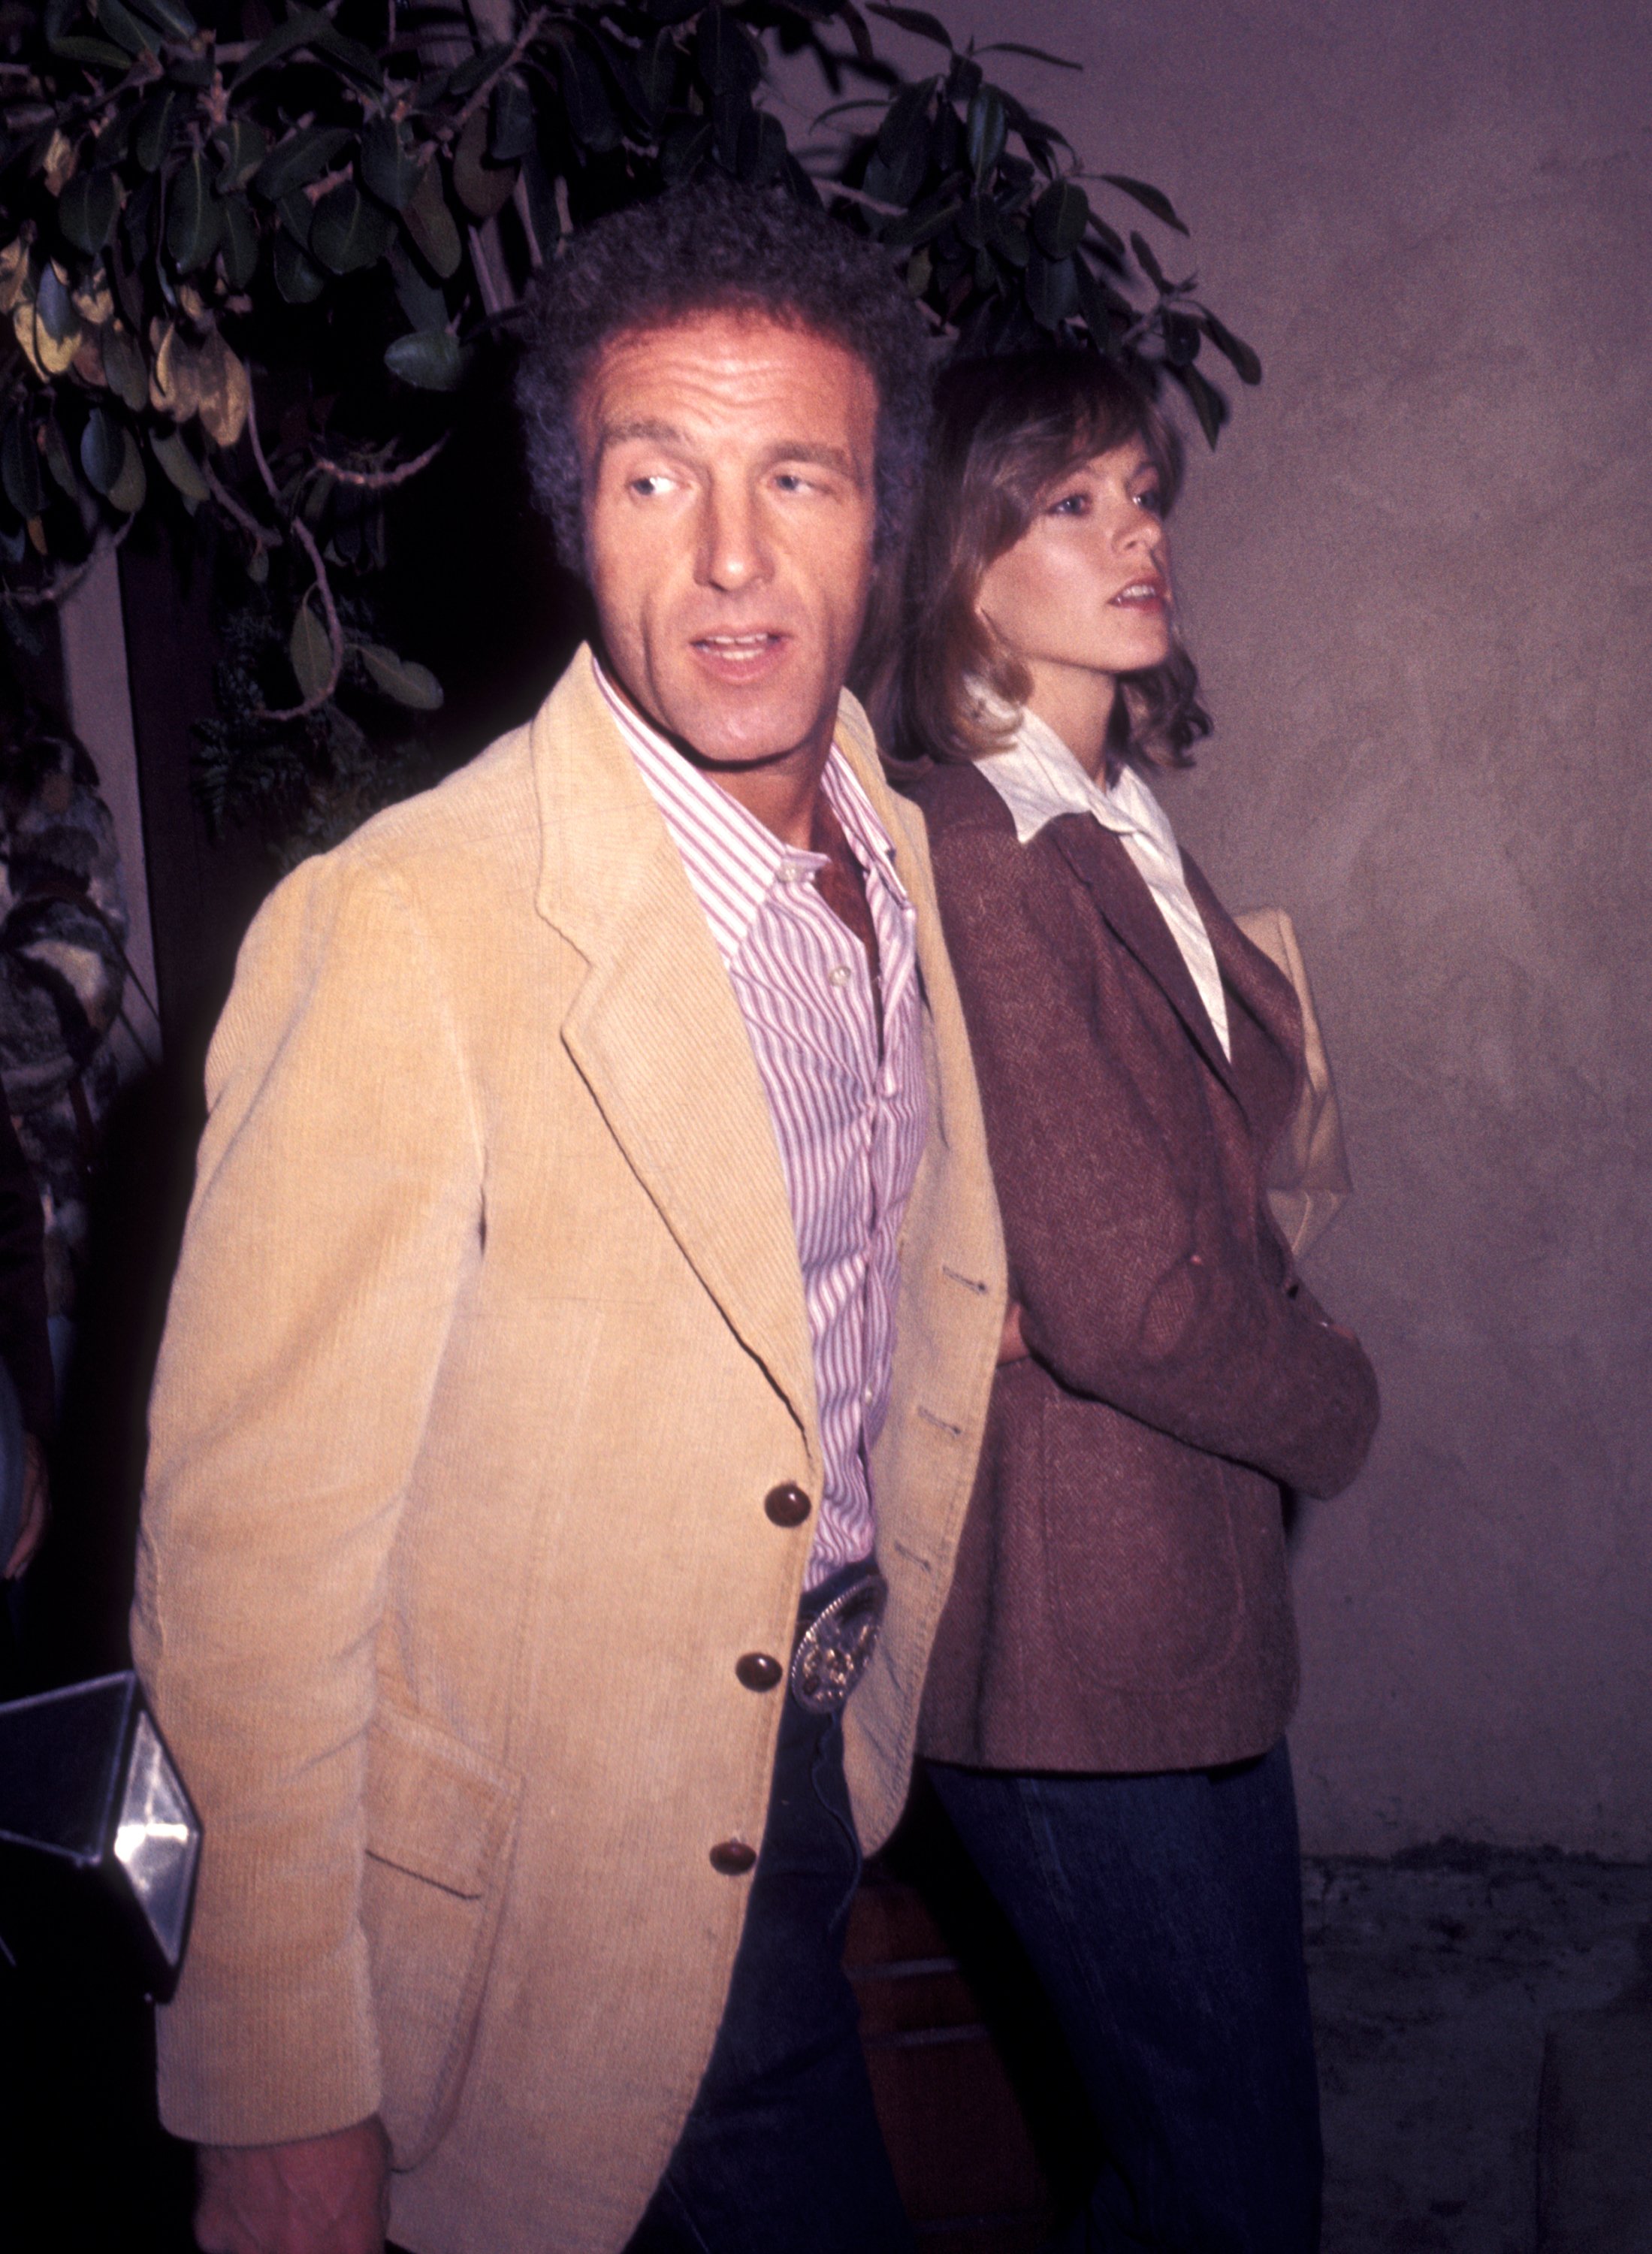 Actor James Caan and Sheila Ryan attend the screening of "Black Sunday" on March 23, 1977 at Mann Village Theater in Westwood, California. | Source: Getty Images